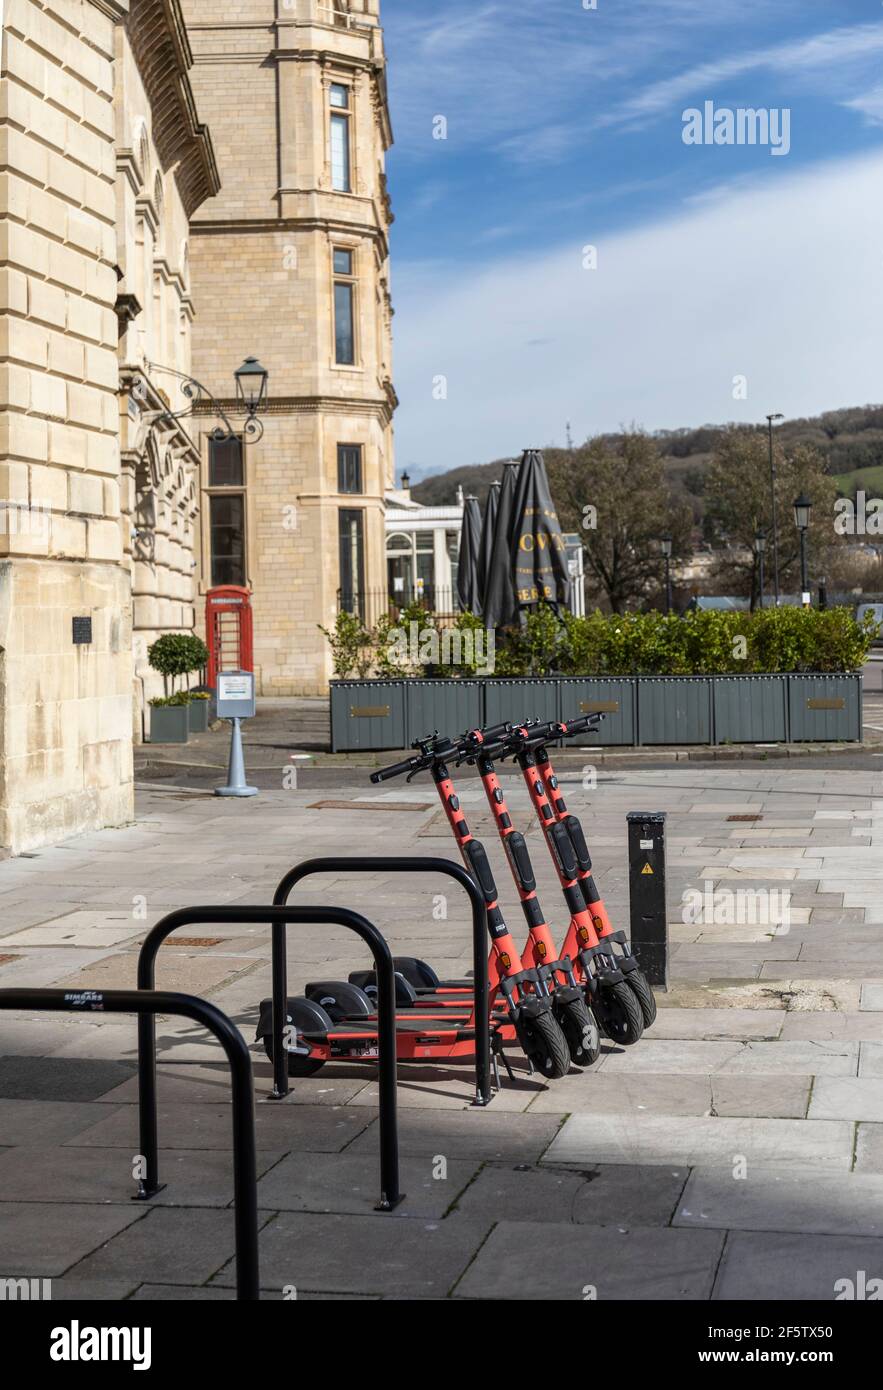 As part of a trial E-scooters are available to hire near The Guildhall in the City of Bath, Somerset, England, UK Stock Photo